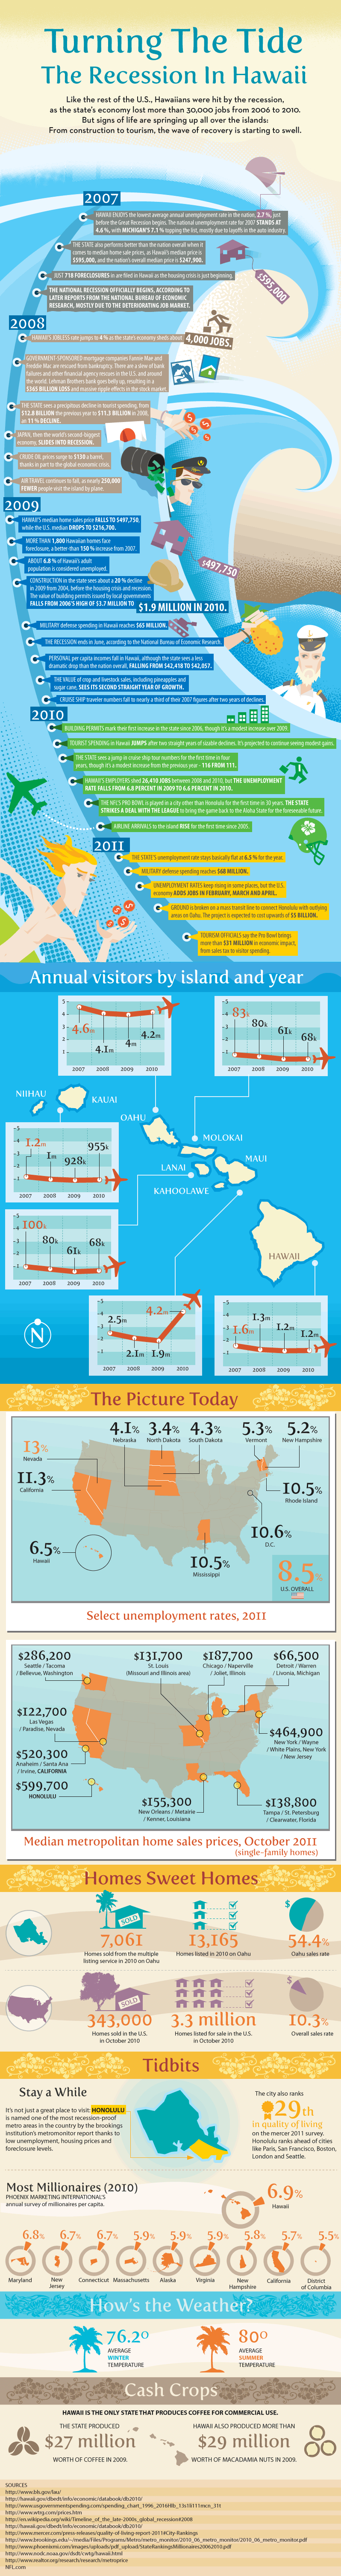 Turning The Tide: The Recession In Hawaii